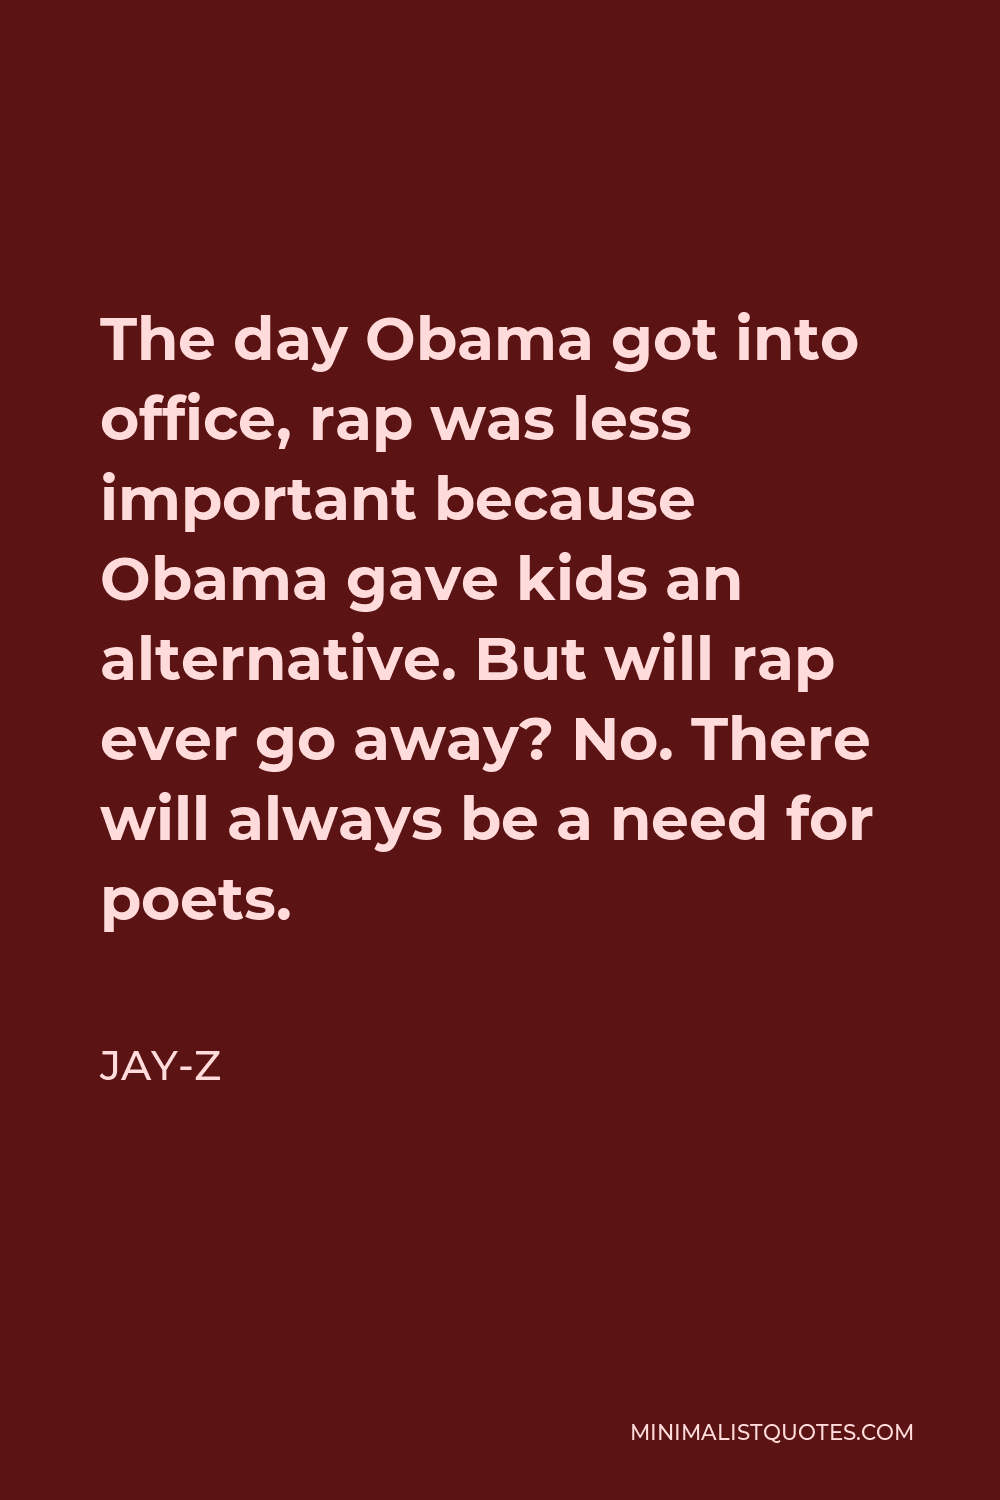 Jay-Z Quote - The day Obama got into office, rap was less important because Obama gave kids an alternative. But will rap ever go away? No. There will always be a need for poets.